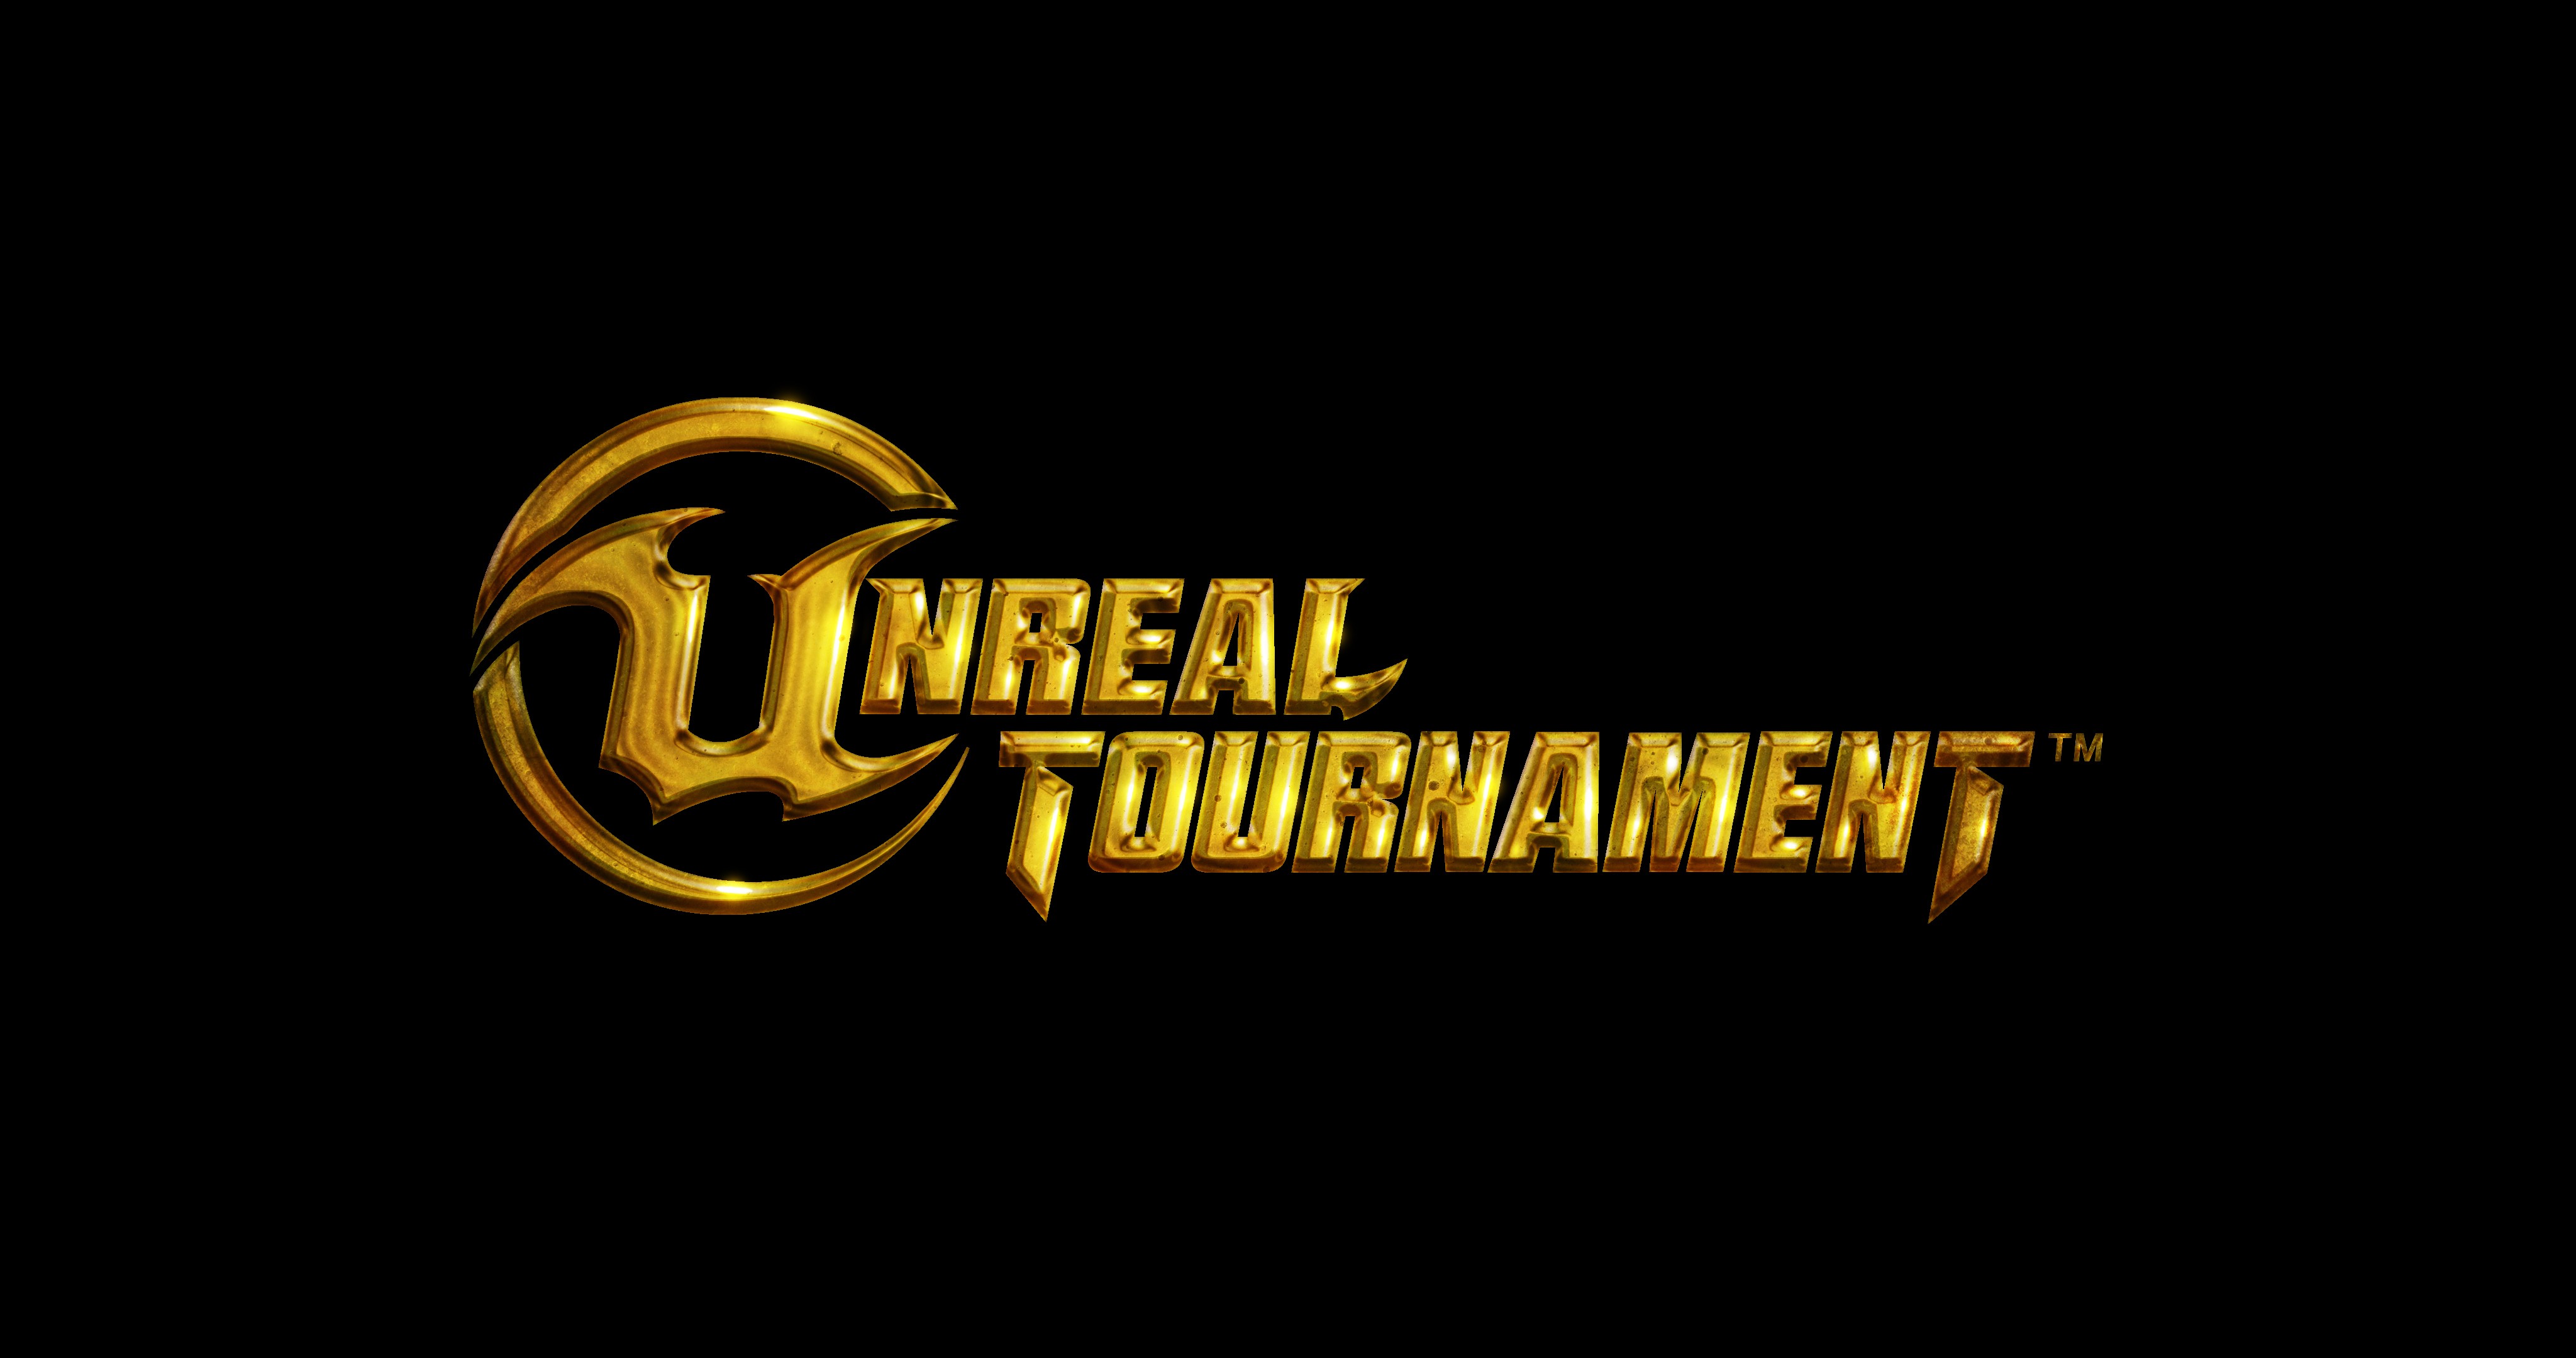 General 4096x2160 Unreal Tournament simple background PC gaming logo black background